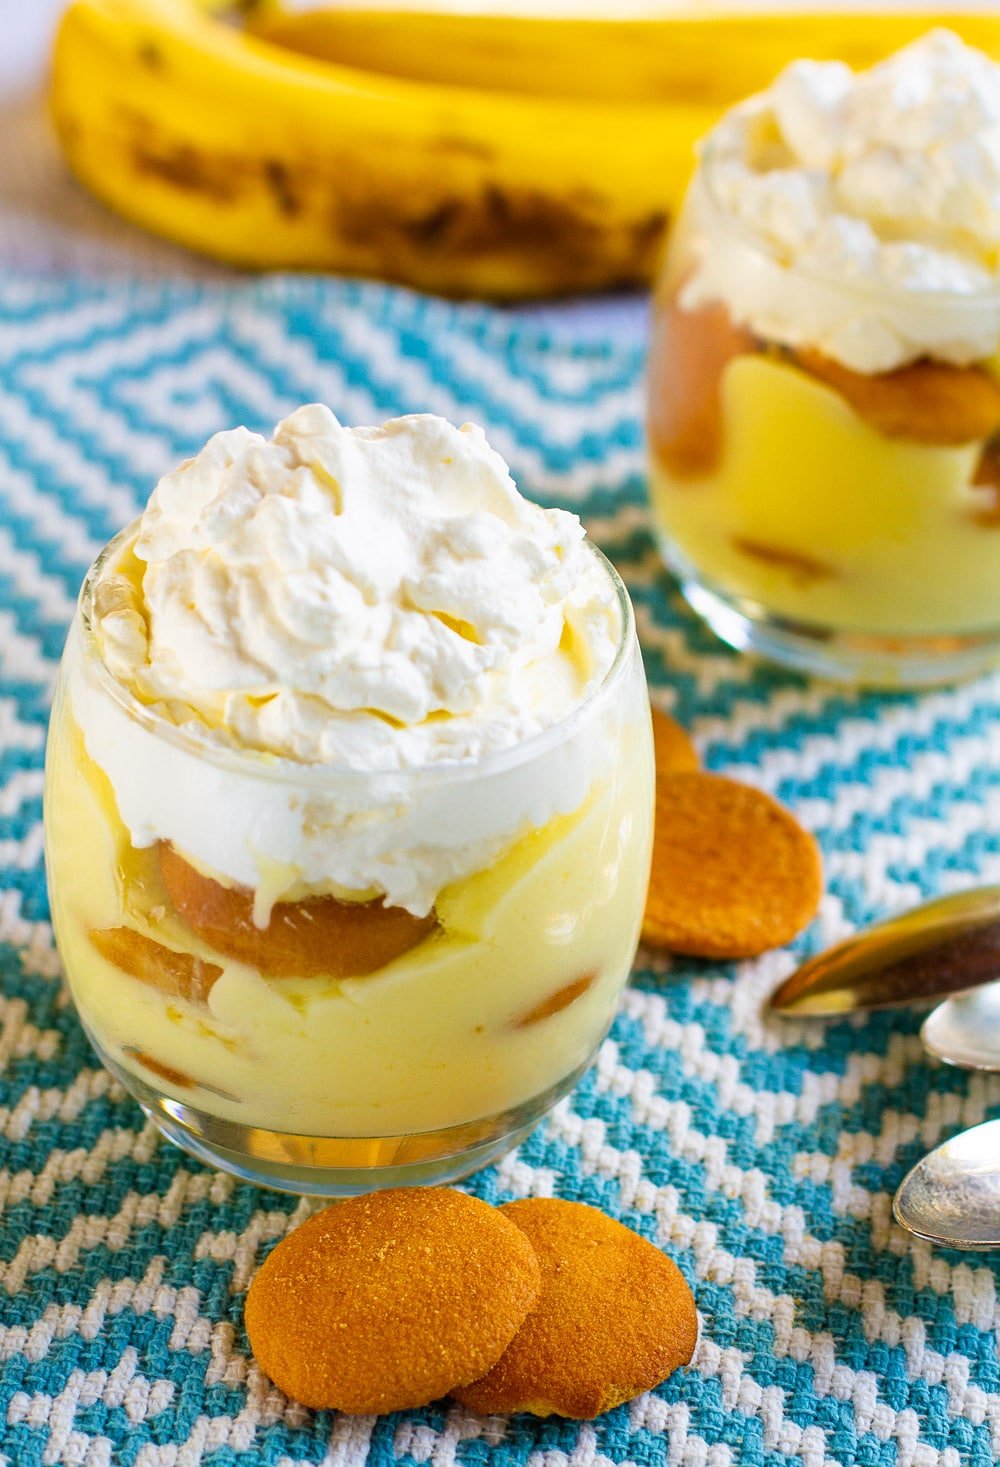 Banana Pudding in 2 glasses with vanilla wafers around the glasses.